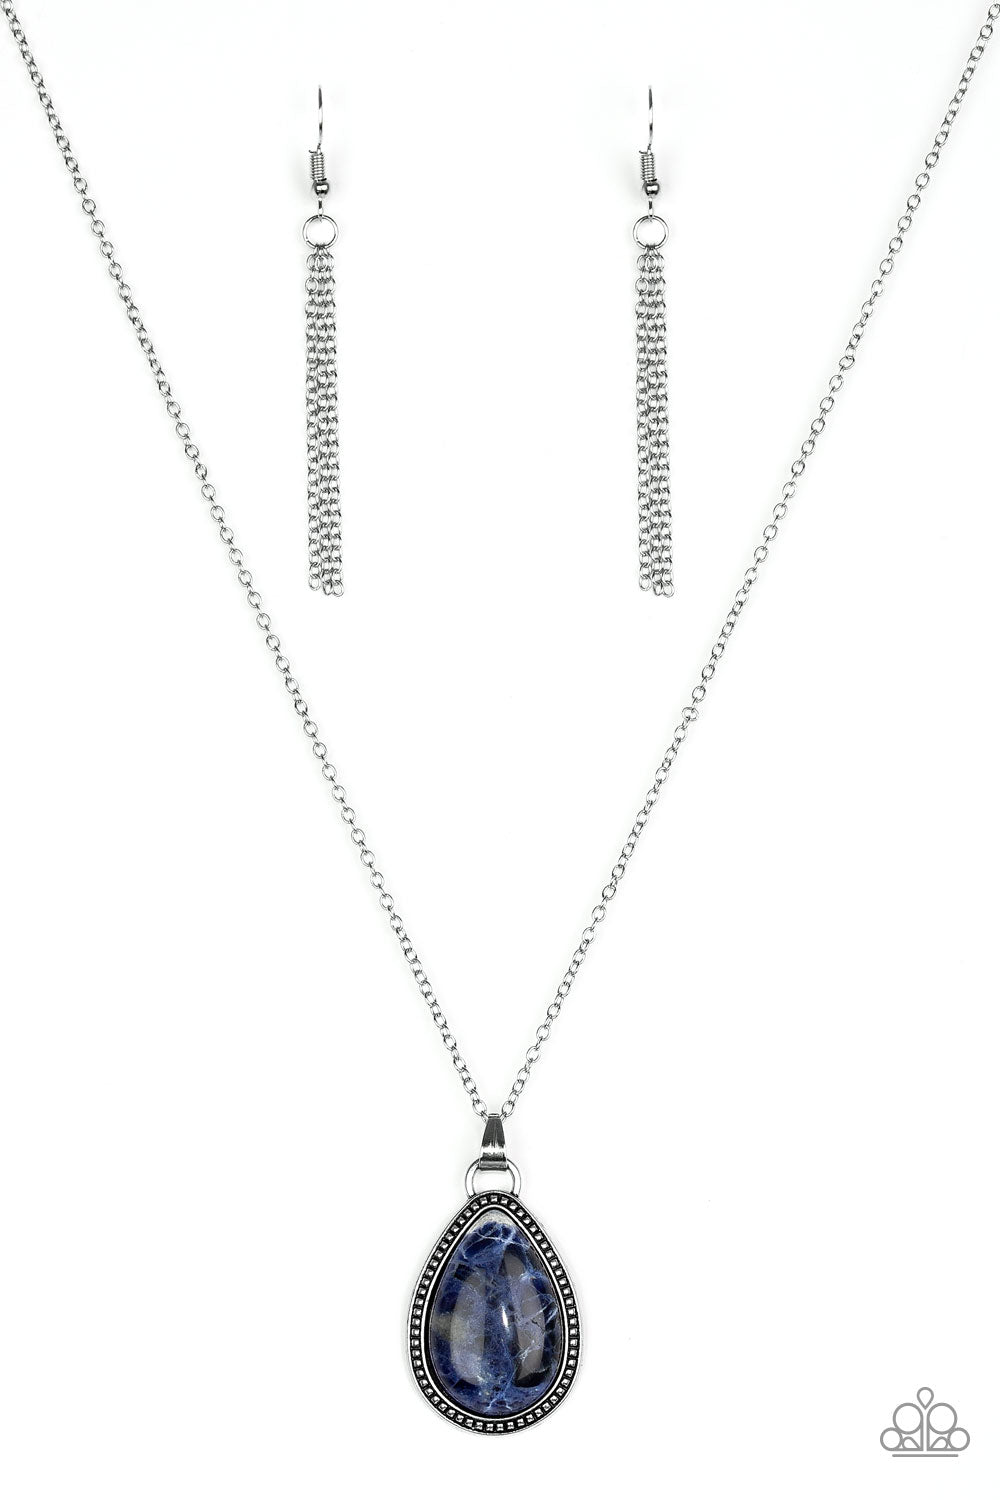 On the Home Frontier Blue Necklace